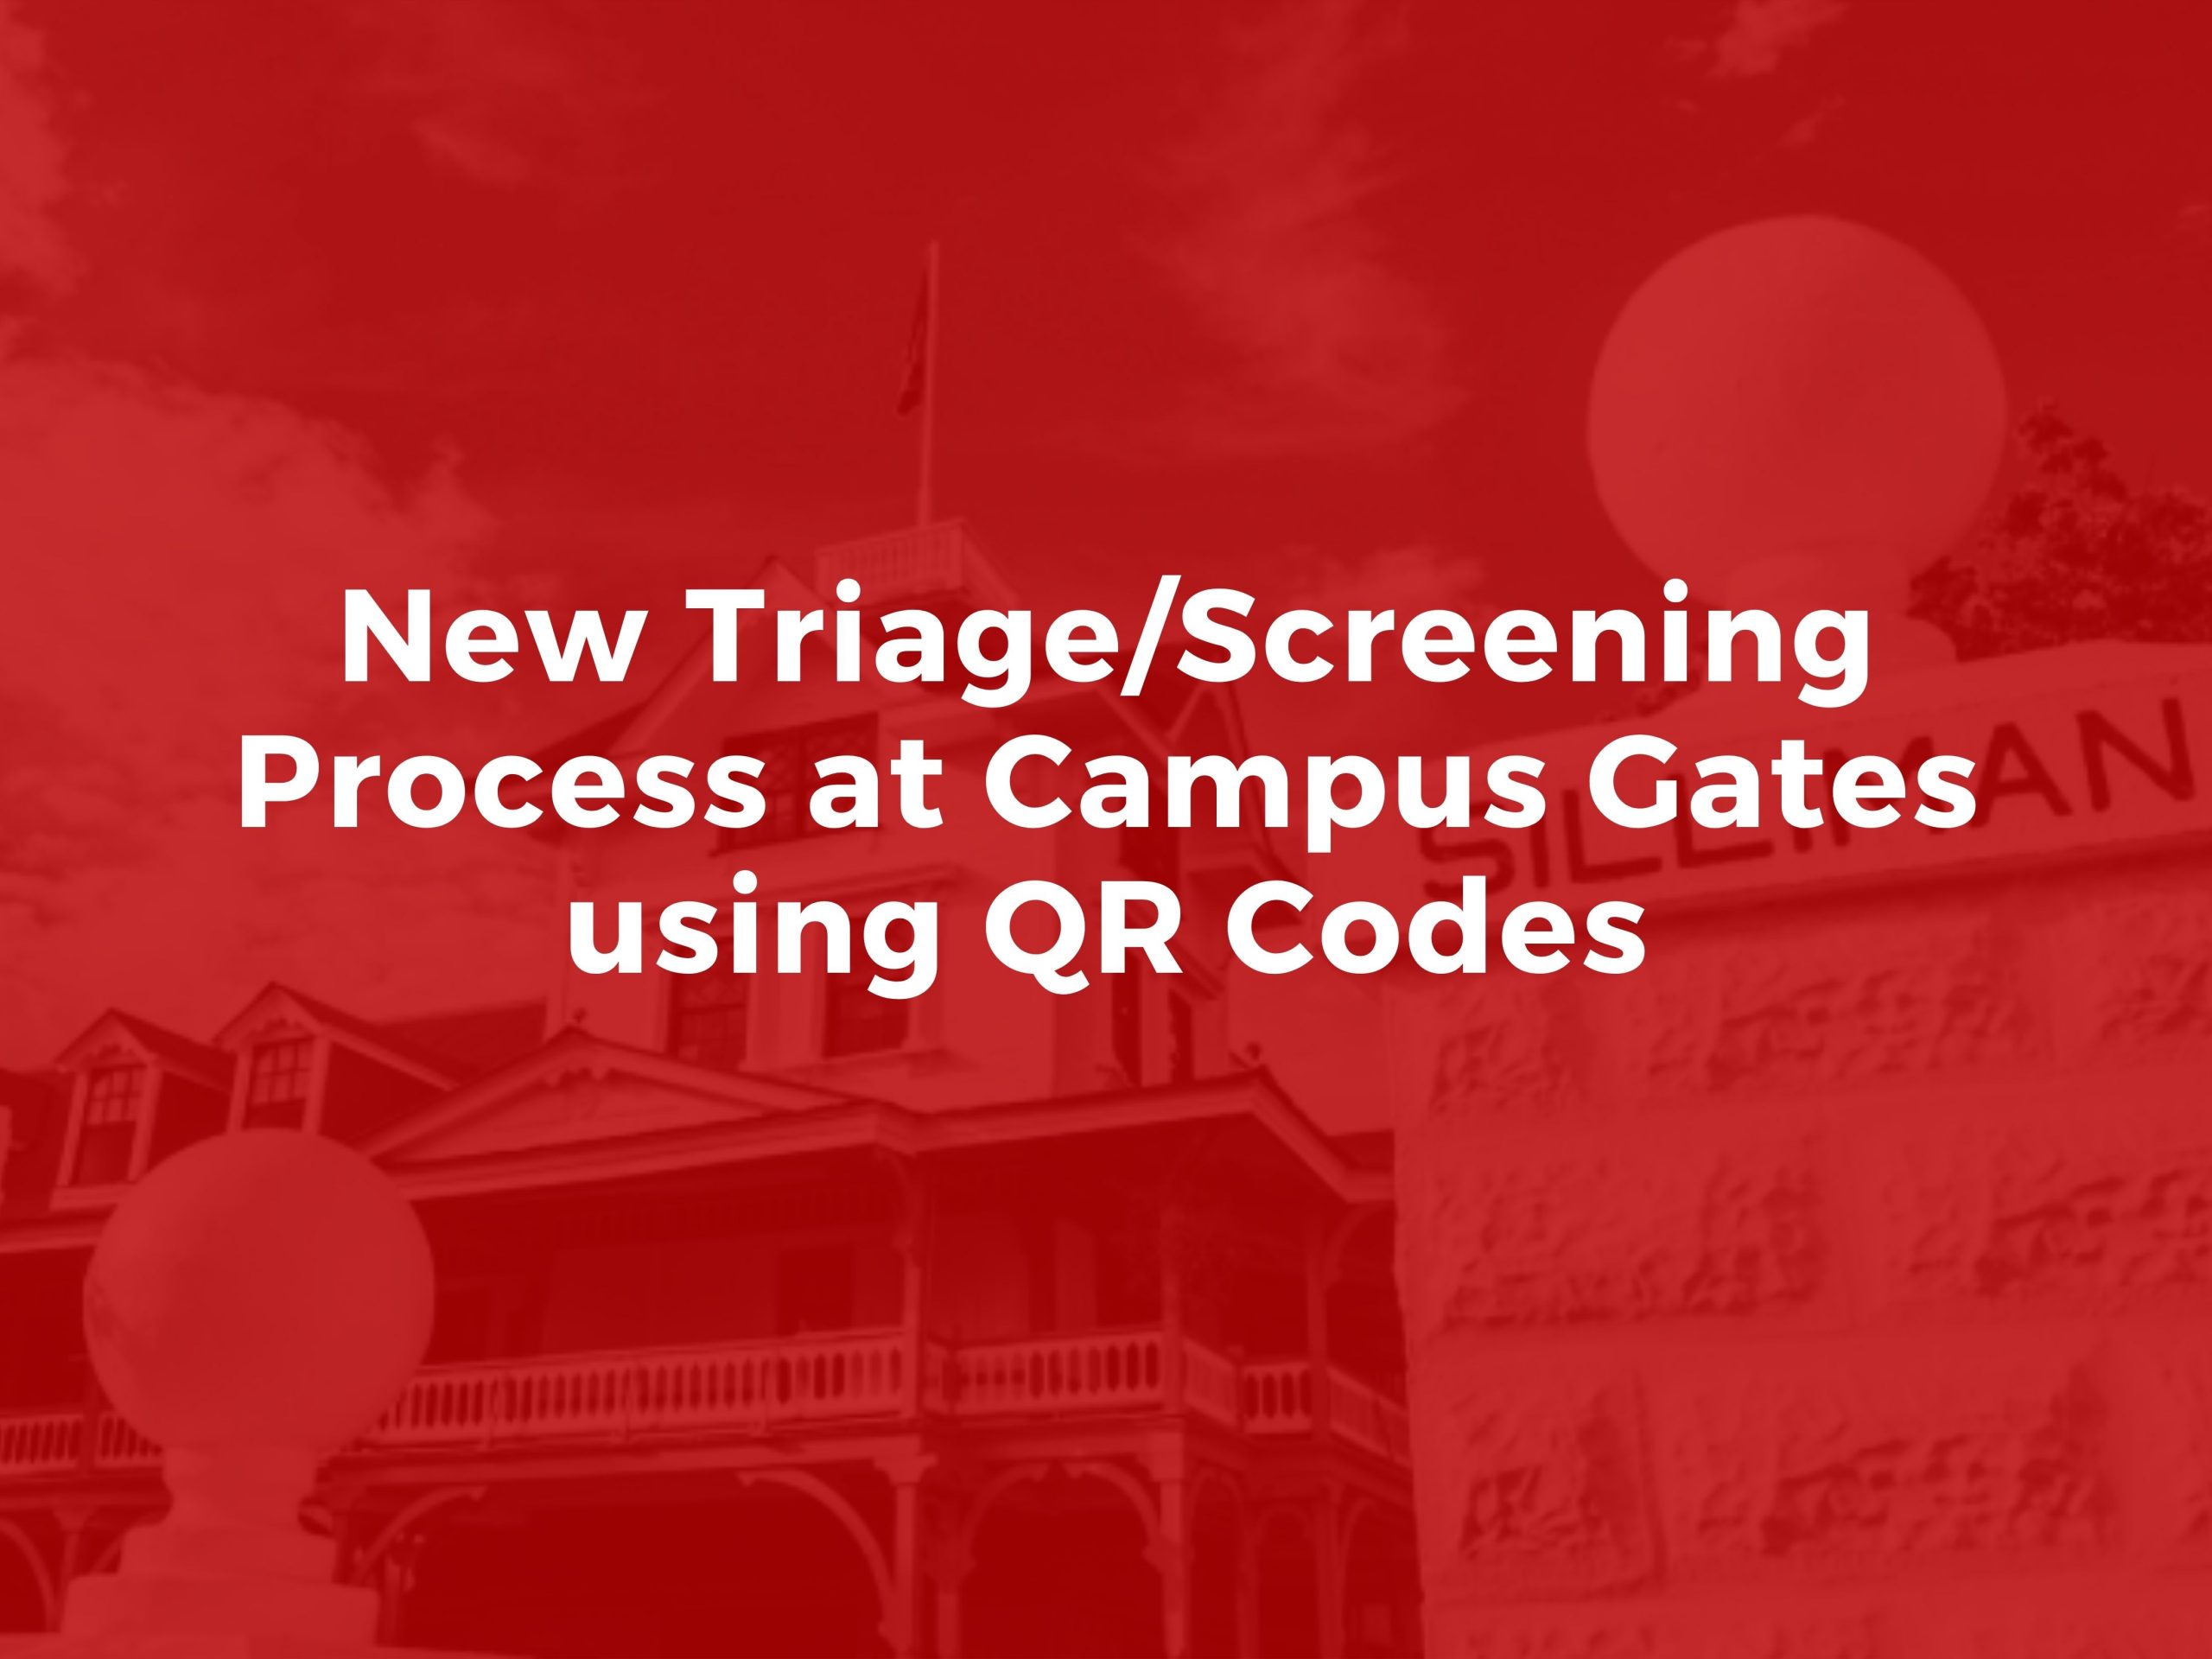 Announcement: New Triage/Screening Process at Campus Gates using QR Codes